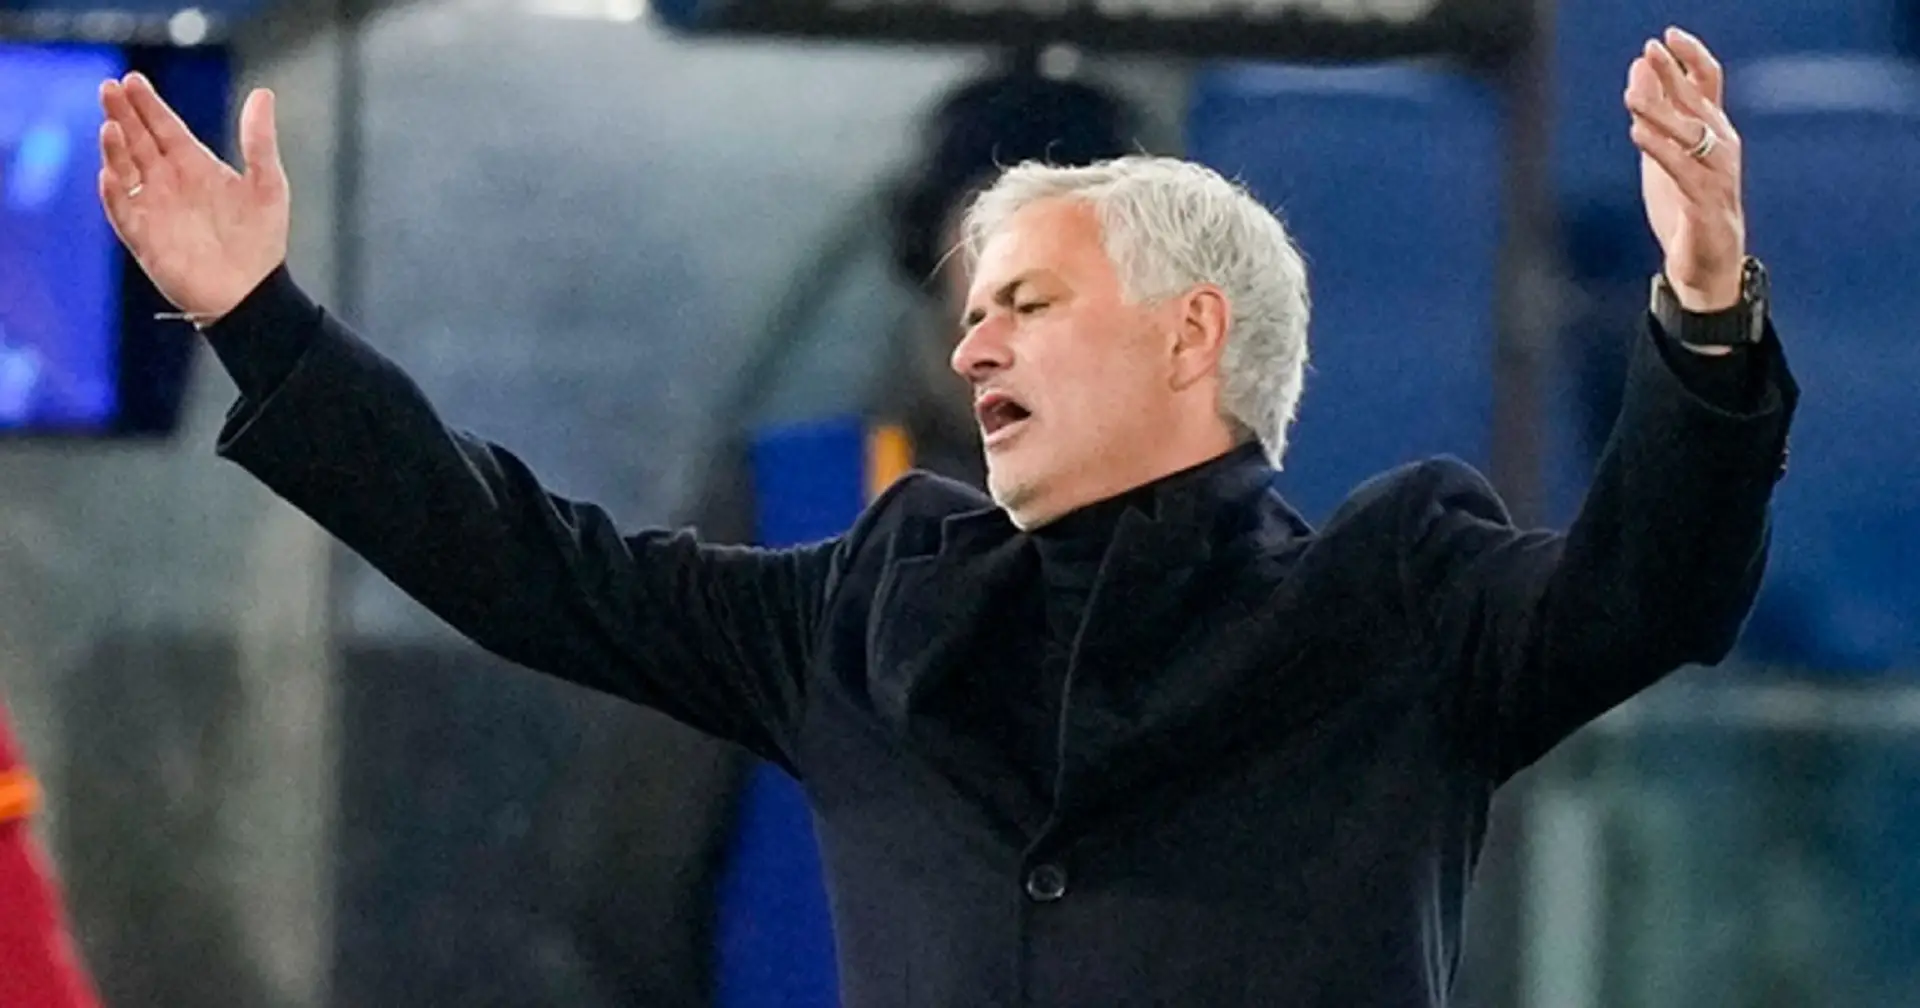 Jose Mourinho leaves AS Roma & 2 more big stories at Chelsea you might've missed